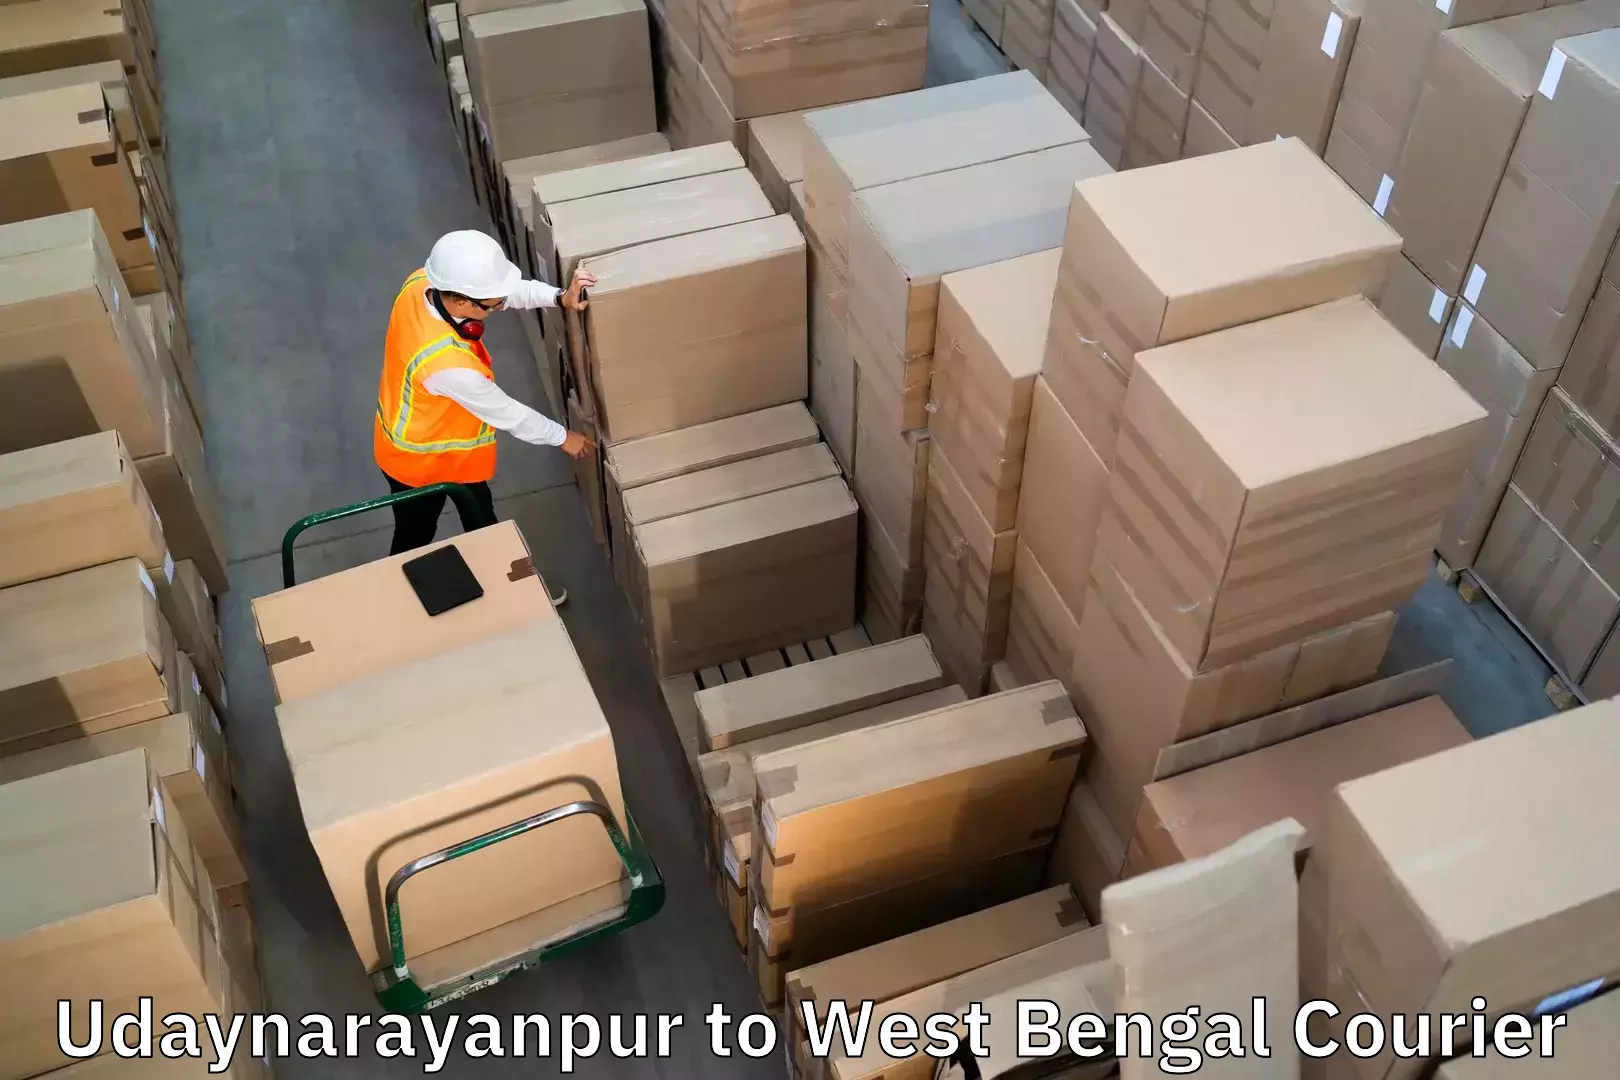 Baggage transport services in Udaynarayanpur to Kaliachak